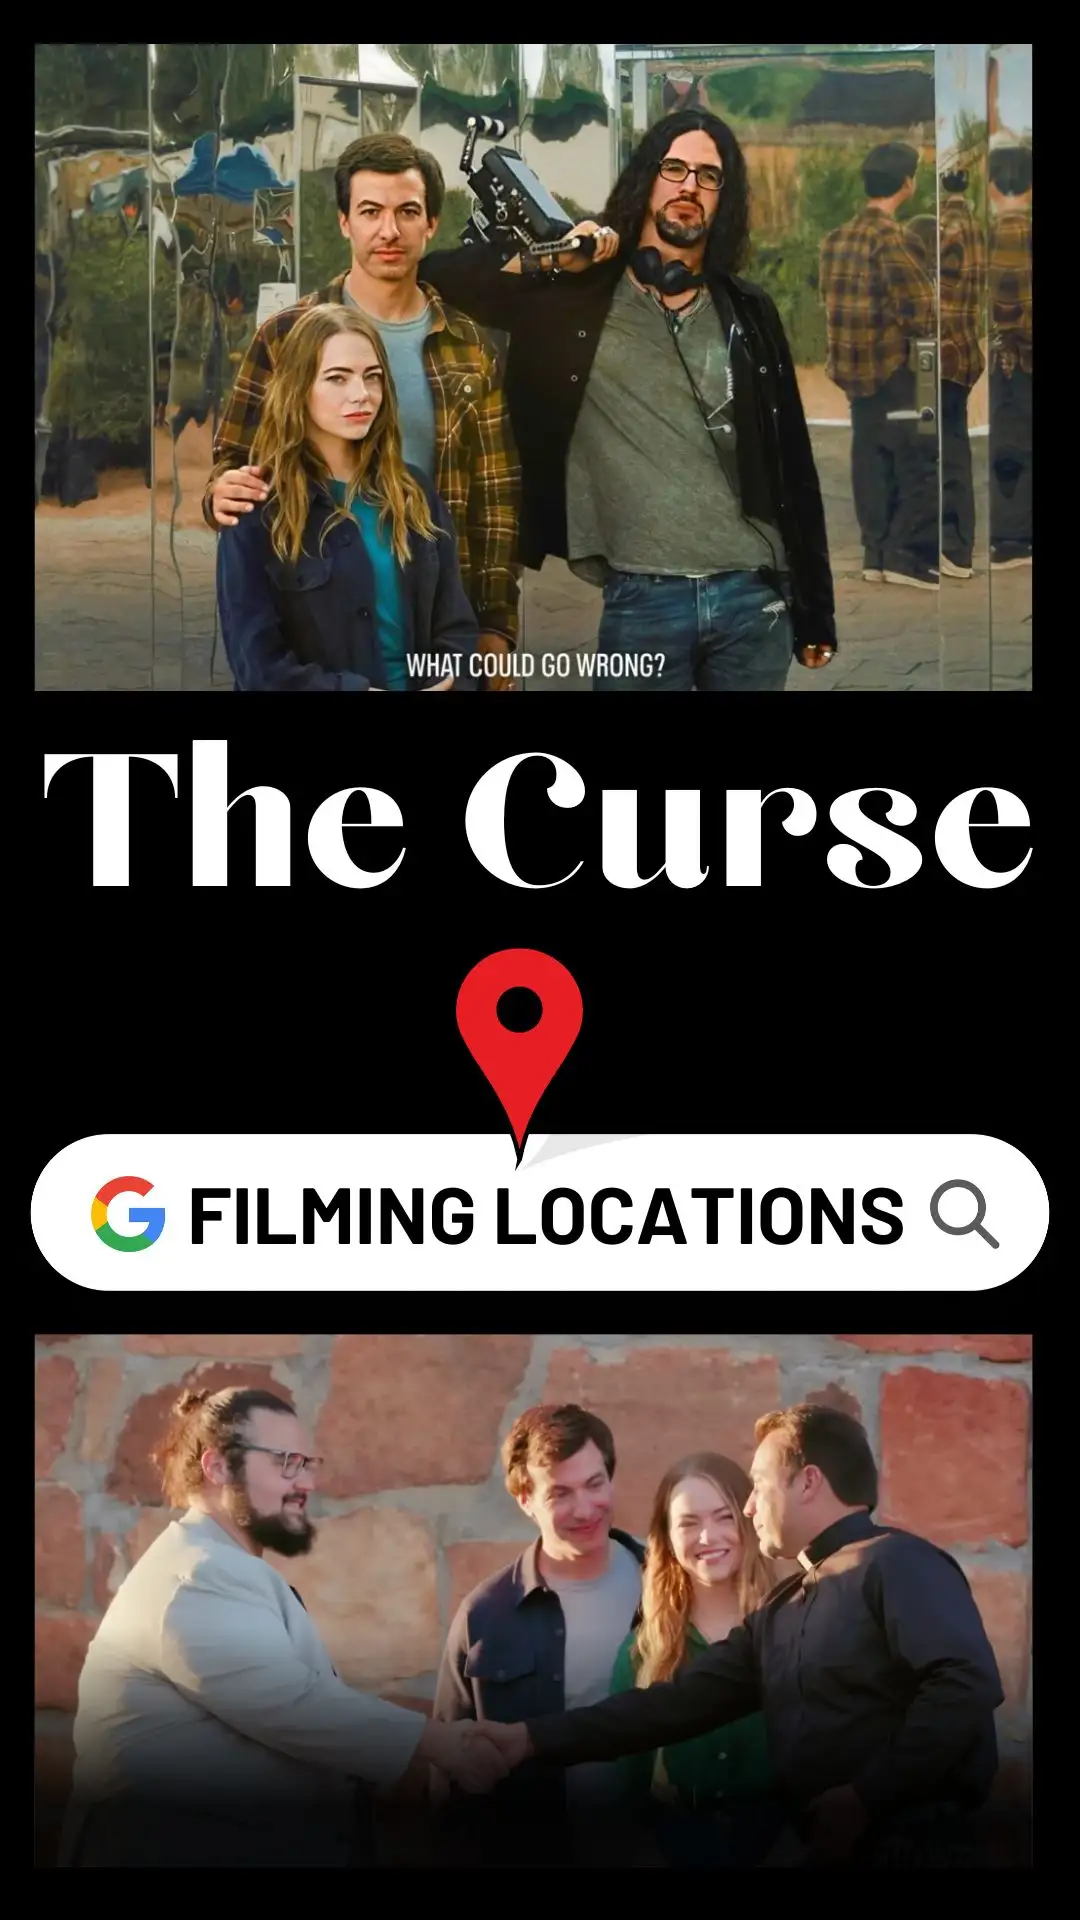 The Curse Filming Locations